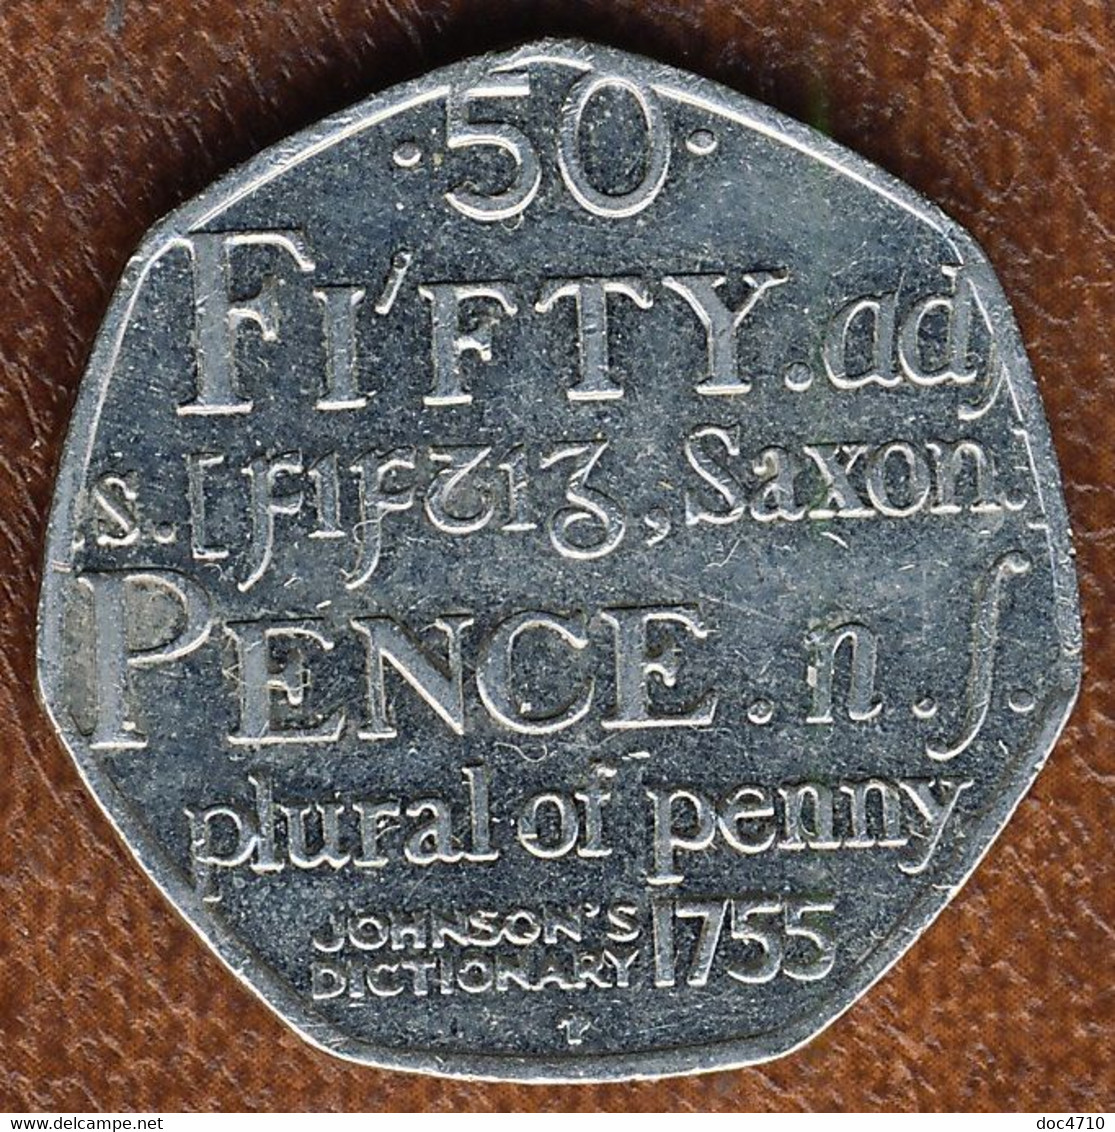 Great Britain United Kingdom 50 Pence 2005, First English Dictionary, KM#1050, XF - 50 Pence